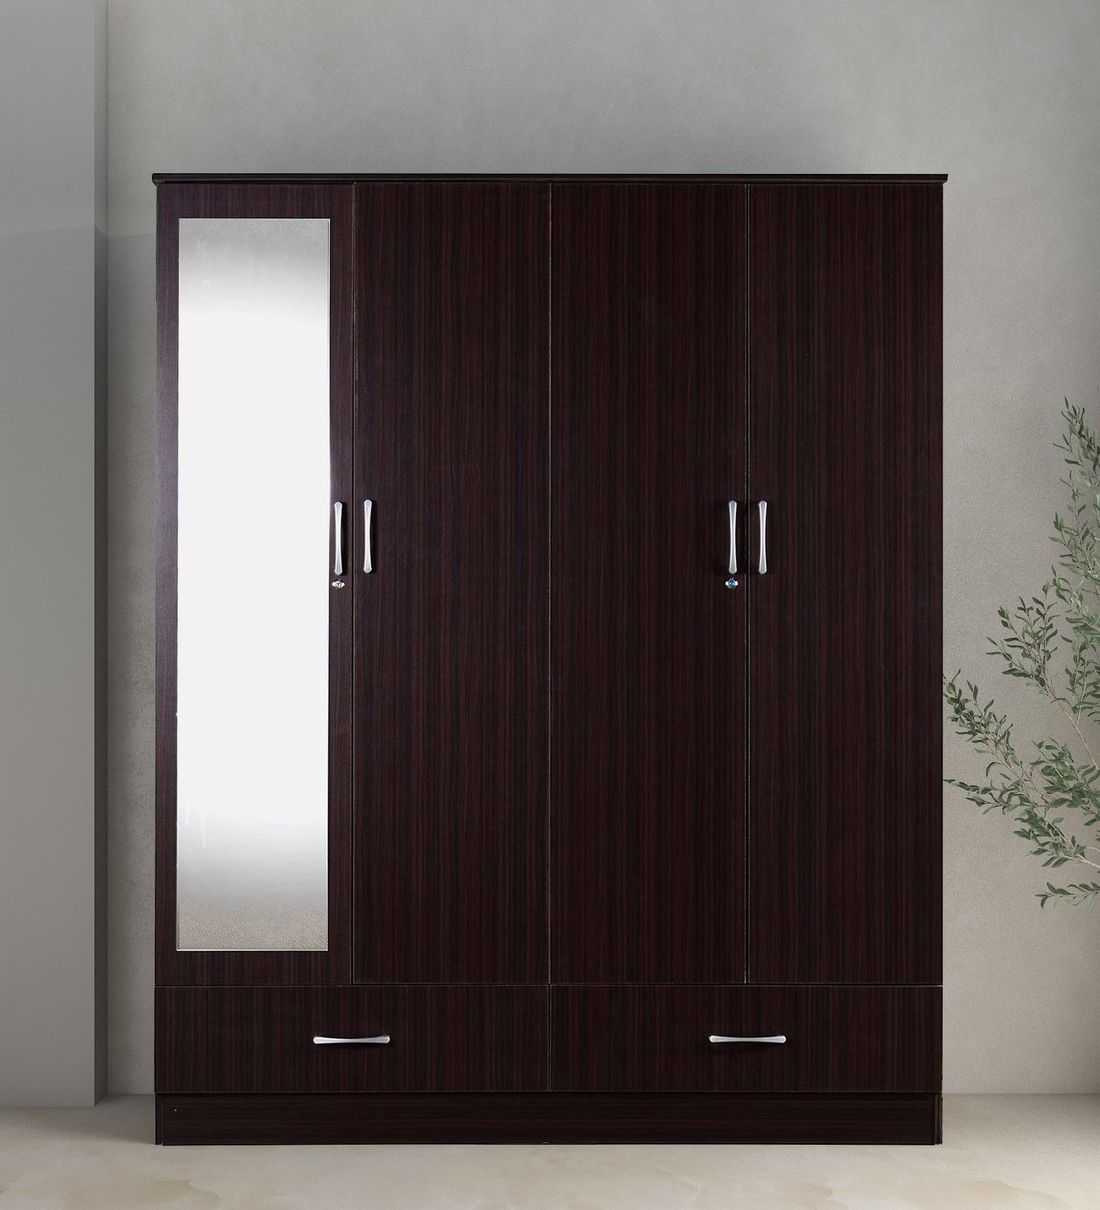 Buy Andes 4 Door Wardrobe With Mirror & Lock + Drawers In Wenge Finish At  29% Offmintwud From Pepperfry | Pepperfry With 4 Door Wardrobes With Mirror And Drawers (View 17 of 20)